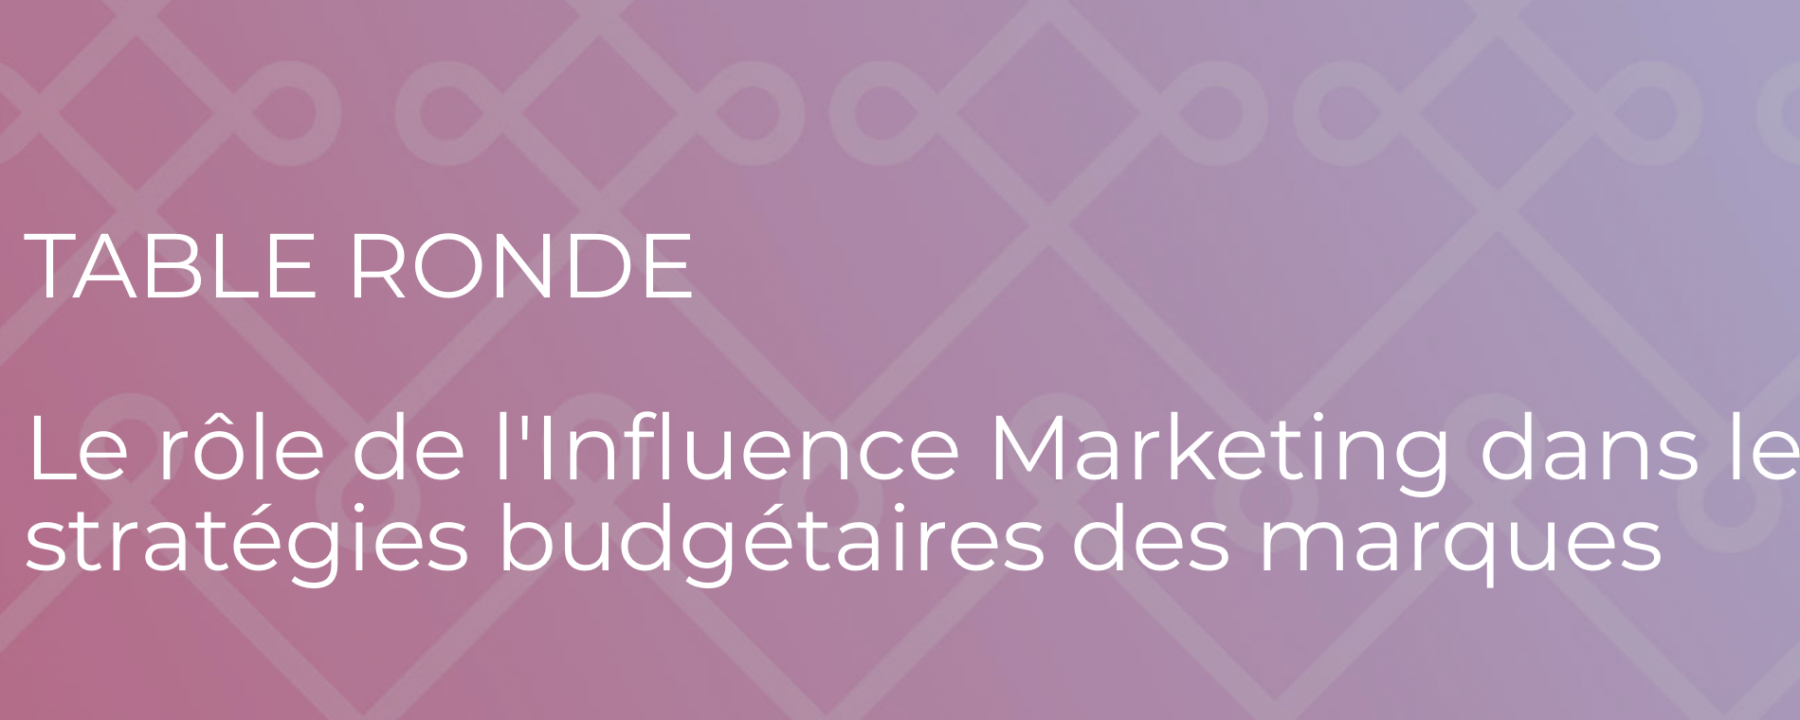 Table ronde influence marketing